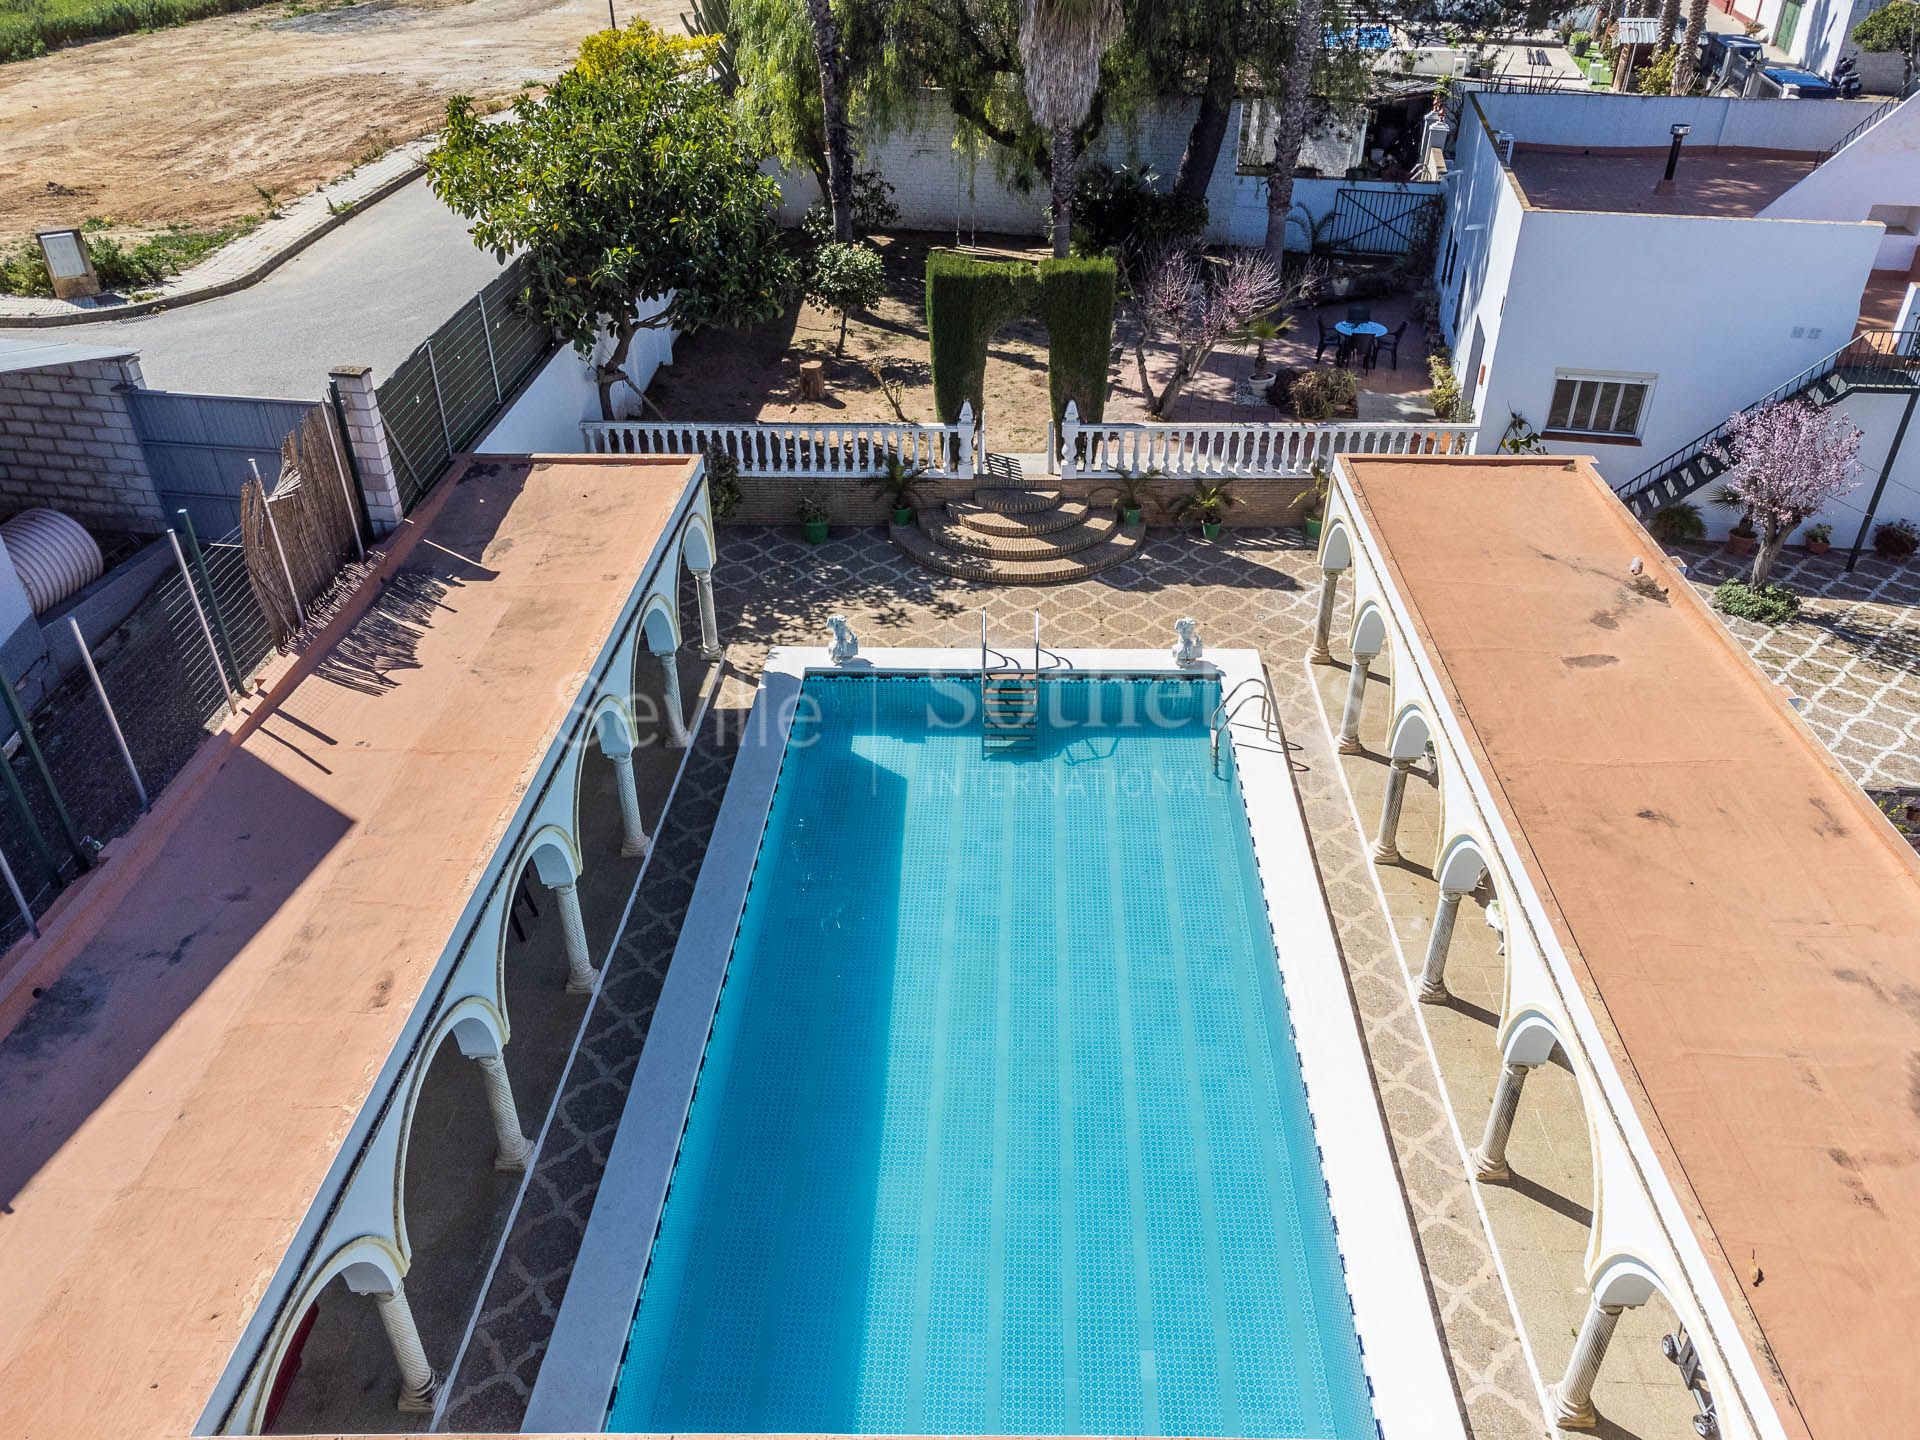 Detached villa in profitability with holiday licence and panoramic views of Seville